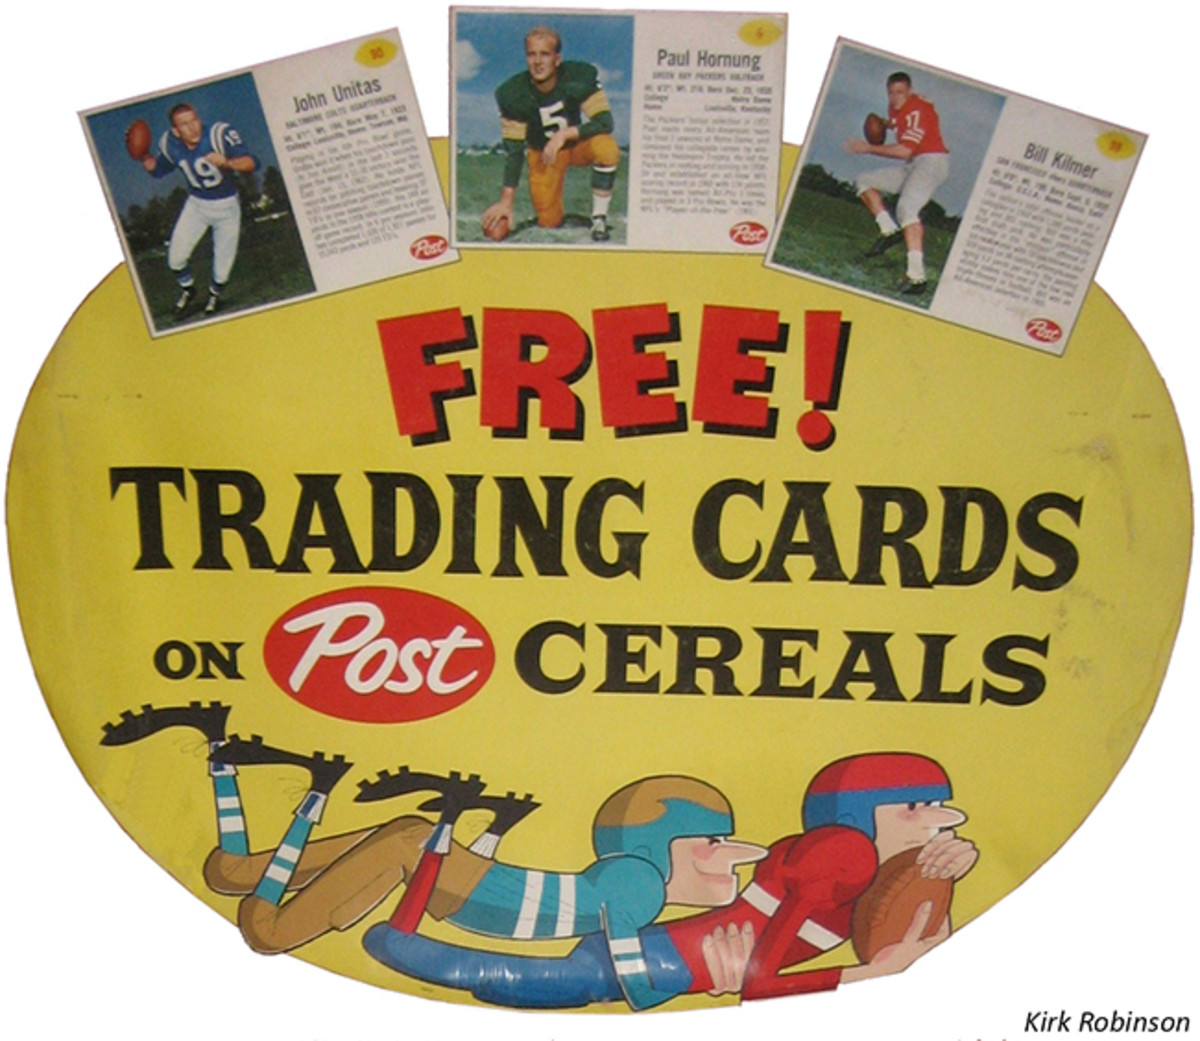 A Post Cereals advertising display sign promotes free trading cards featuring such 1960s football stars as Johnny Unitas, Paul Hornung and Bill Kilmer.